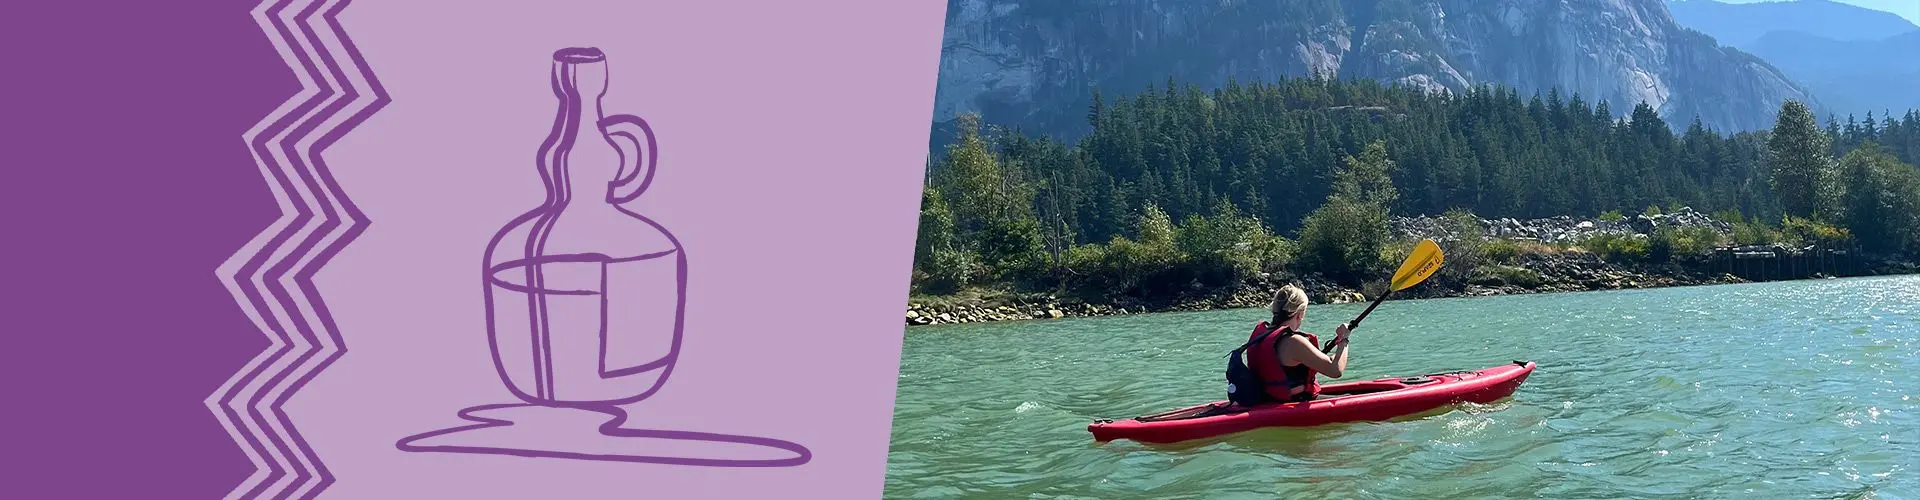 Purple design on left, kayak on lake in Canada with blue sky and mountains in background